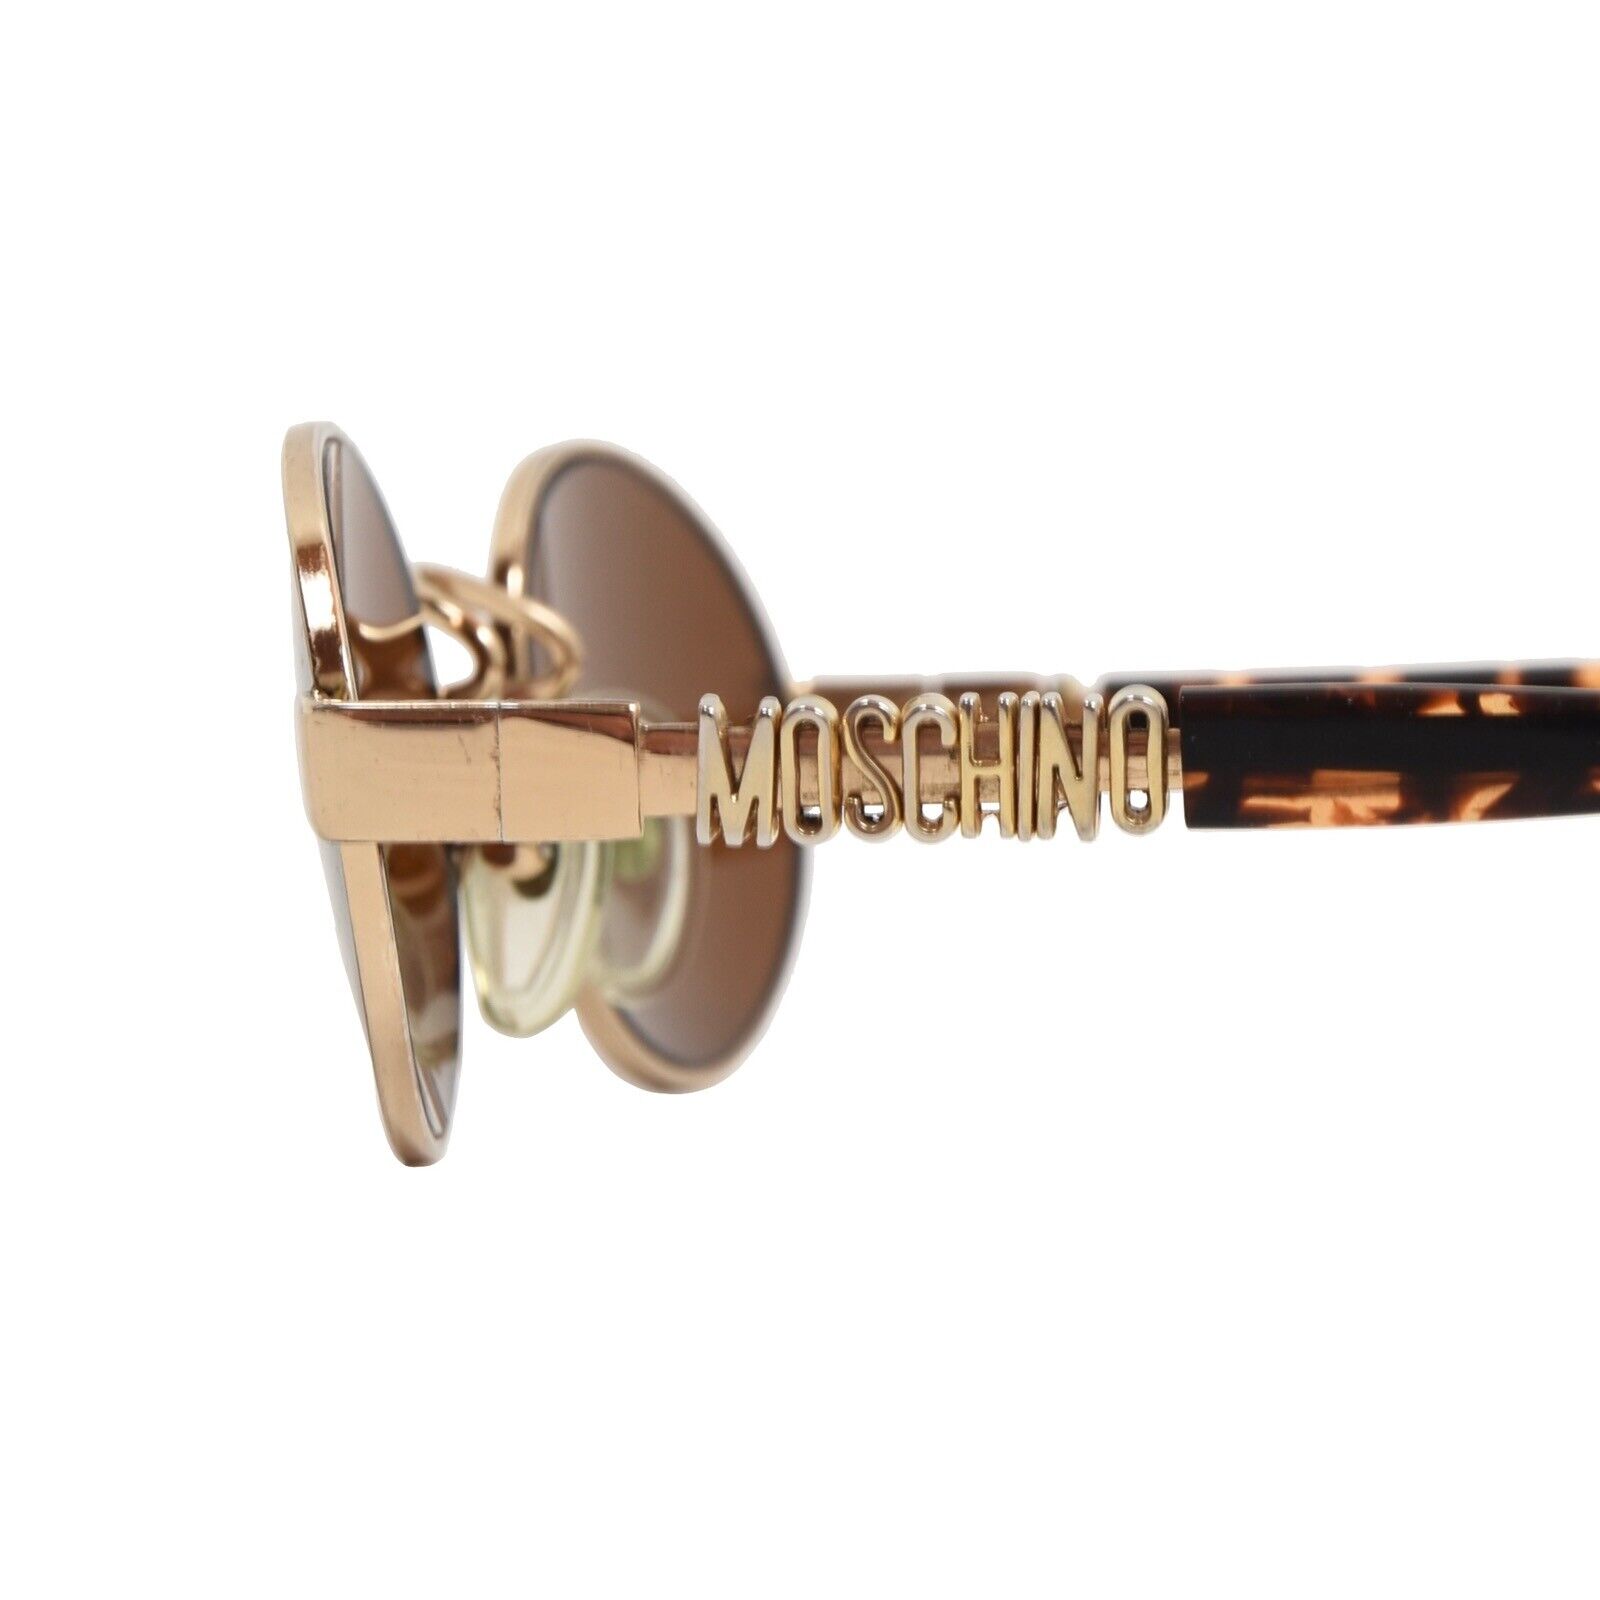 MOSCHINO x Persol VINTAGE Sonnenbrille MM523 Spellout Rund Gold Made Italy ‘90s